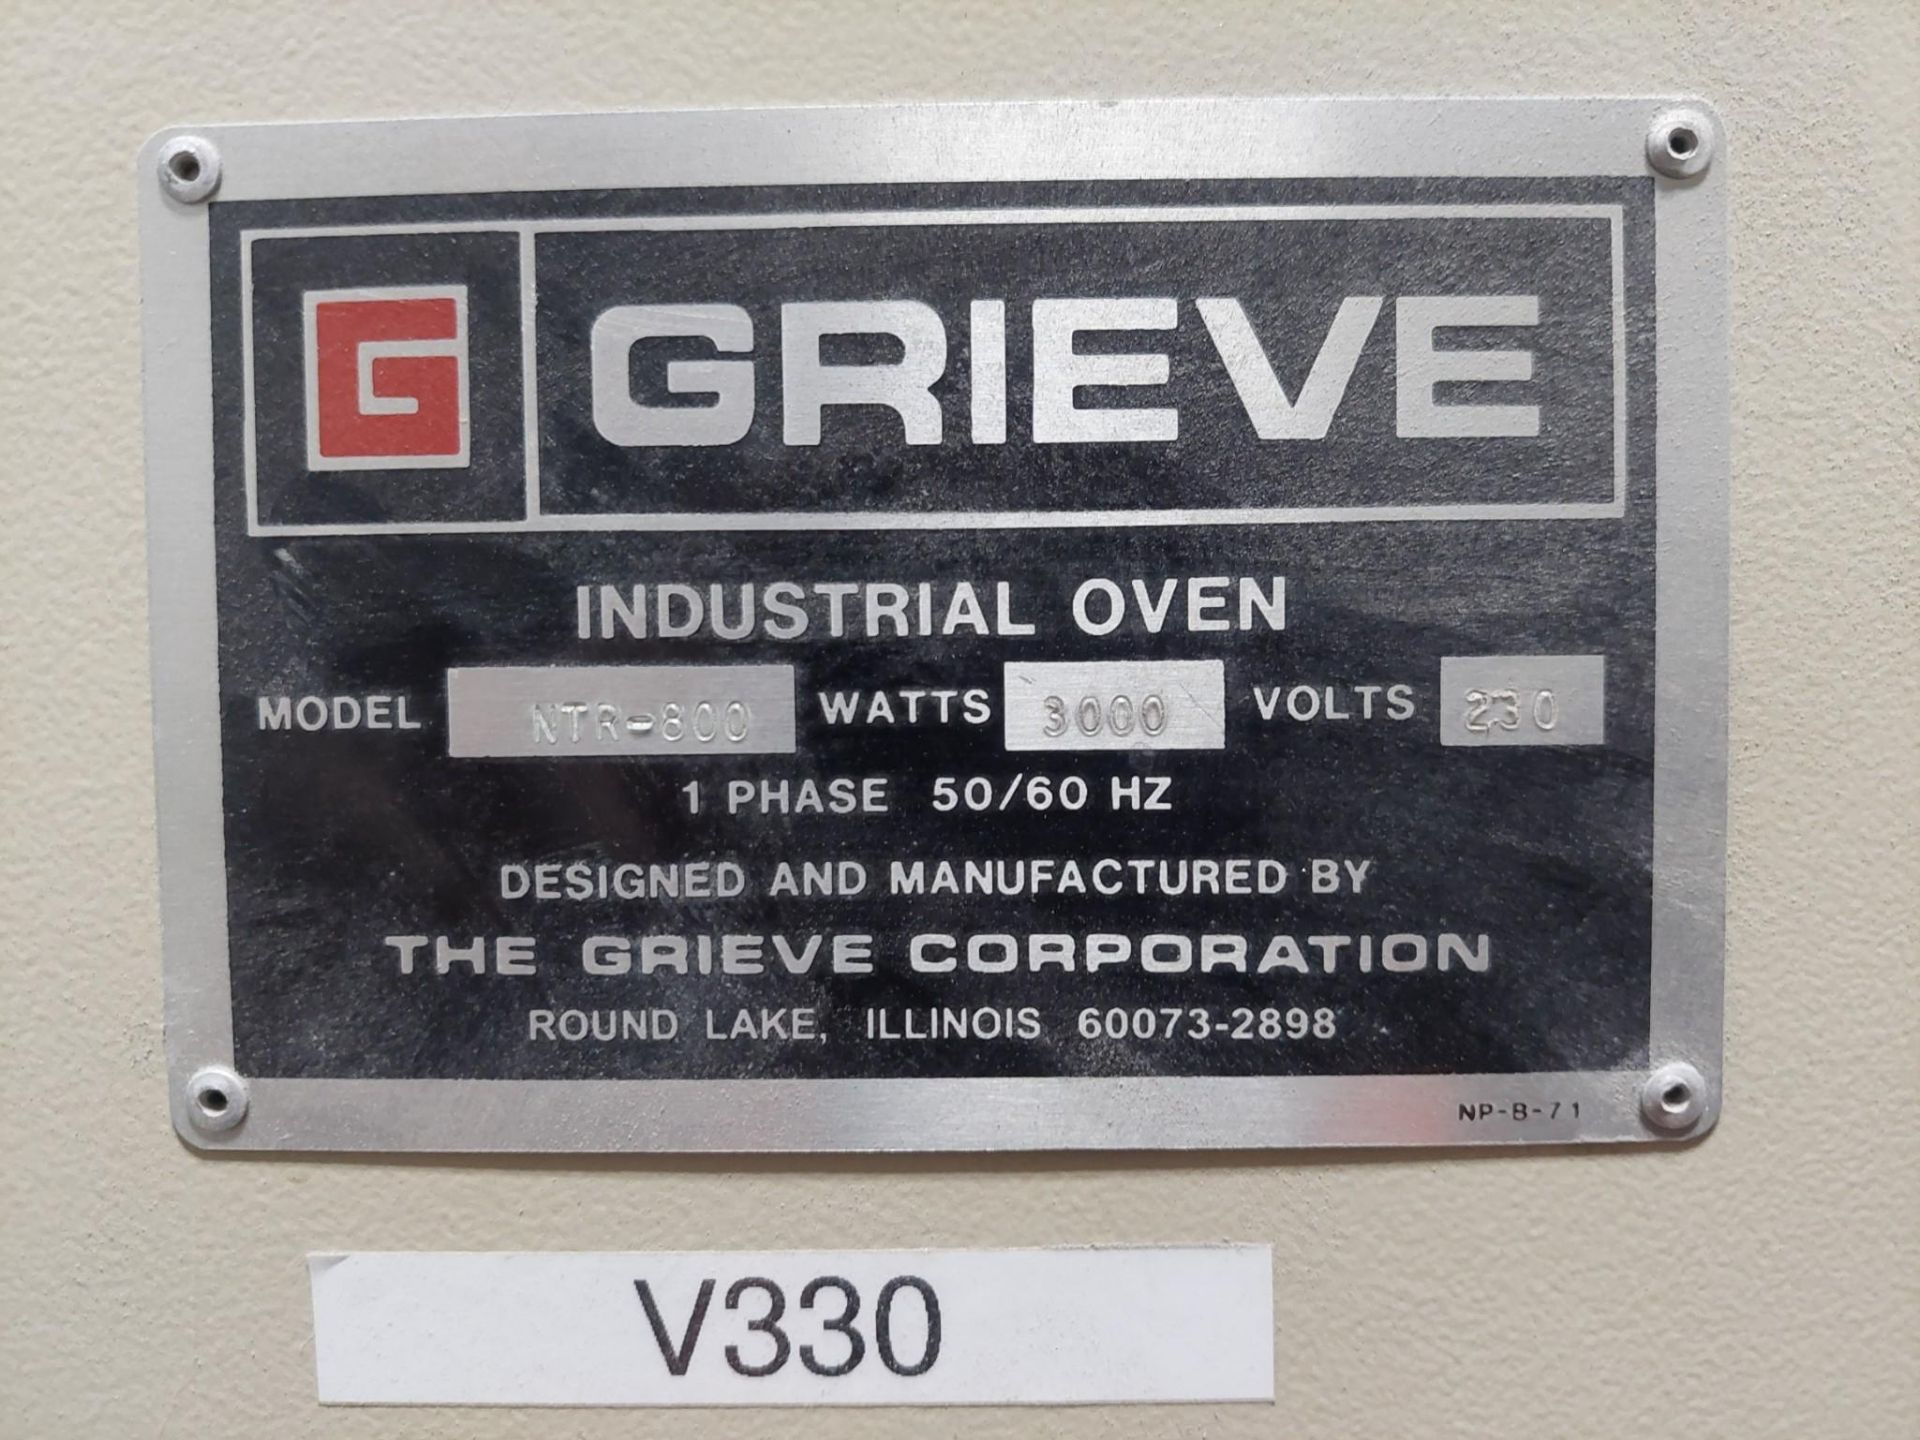 GRIEVE MODEL NTR-800 INDUSTRIAL OVEN - Image 11 of 12